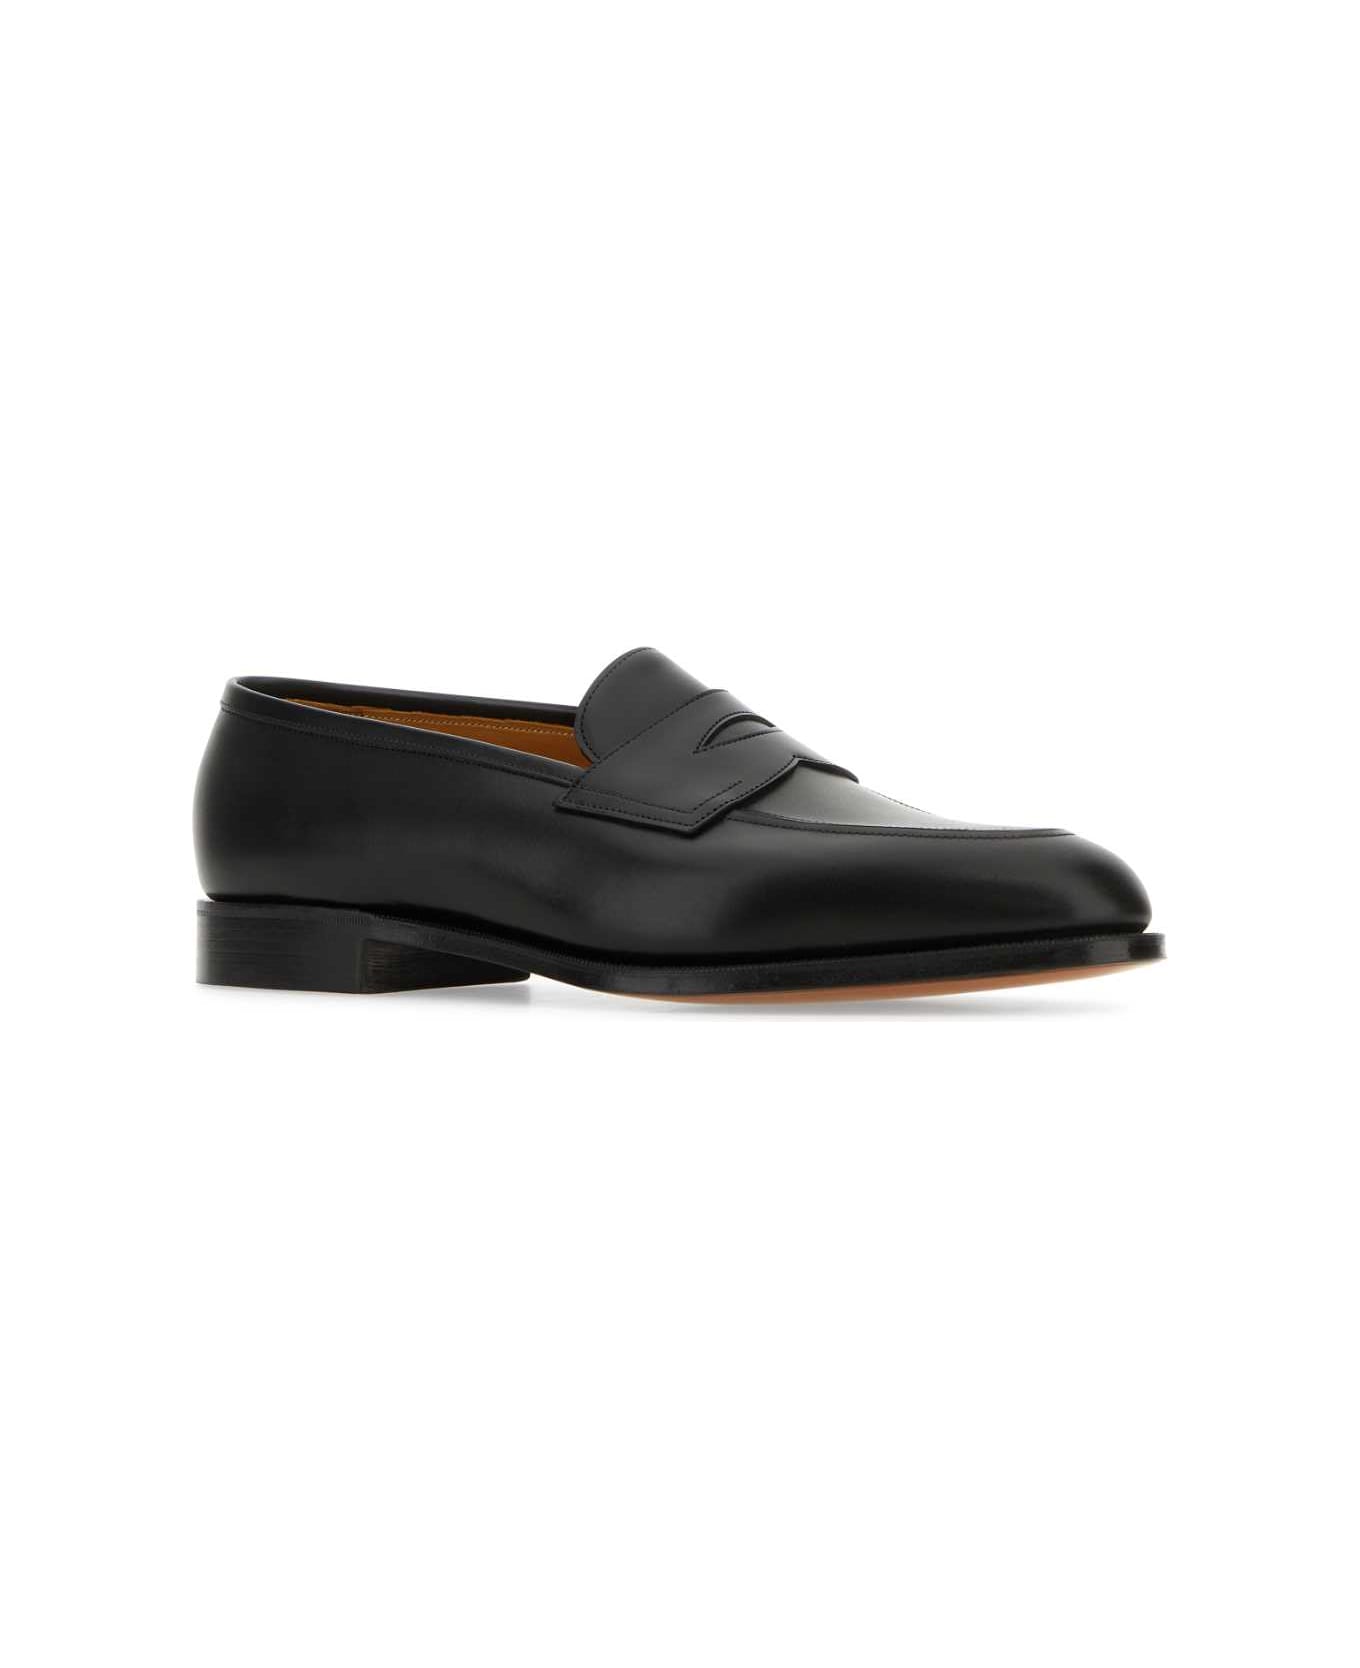 Edward Green Black Leather Piccadilly Loafers - BLACKCALF